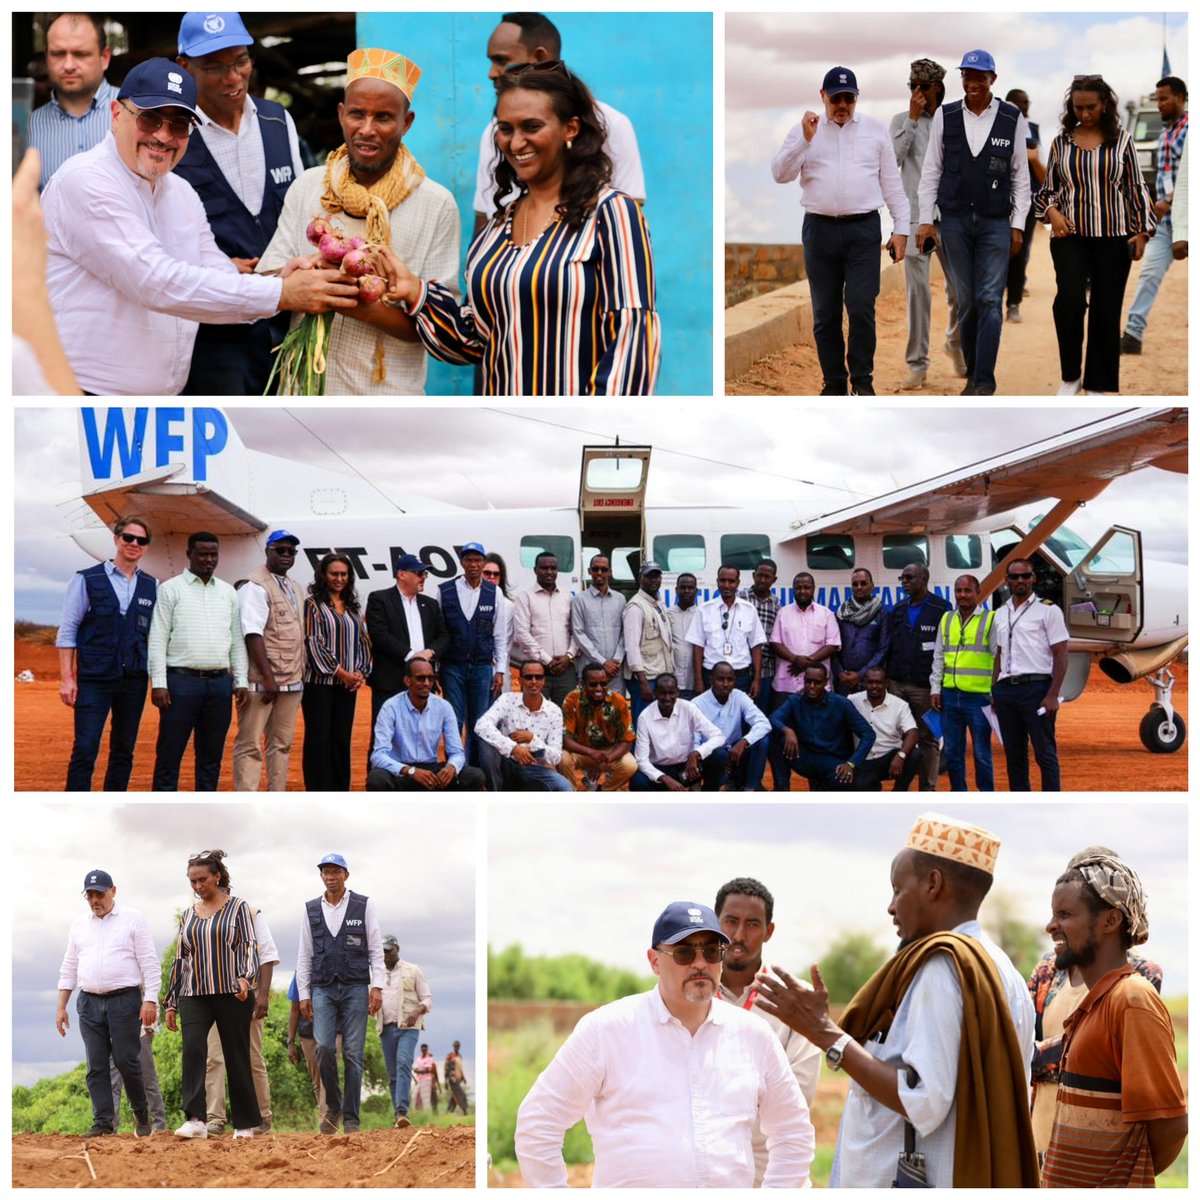 Thank you @RamizAlakbarov & @SemeretaS for visiting @WFP’s work building livelihoods in Dollo Ado via @WFP_UNHAS✈️ .@WFP & @mercycorps are working with communities in #Somali region to transform agro-food systems for food secure families.